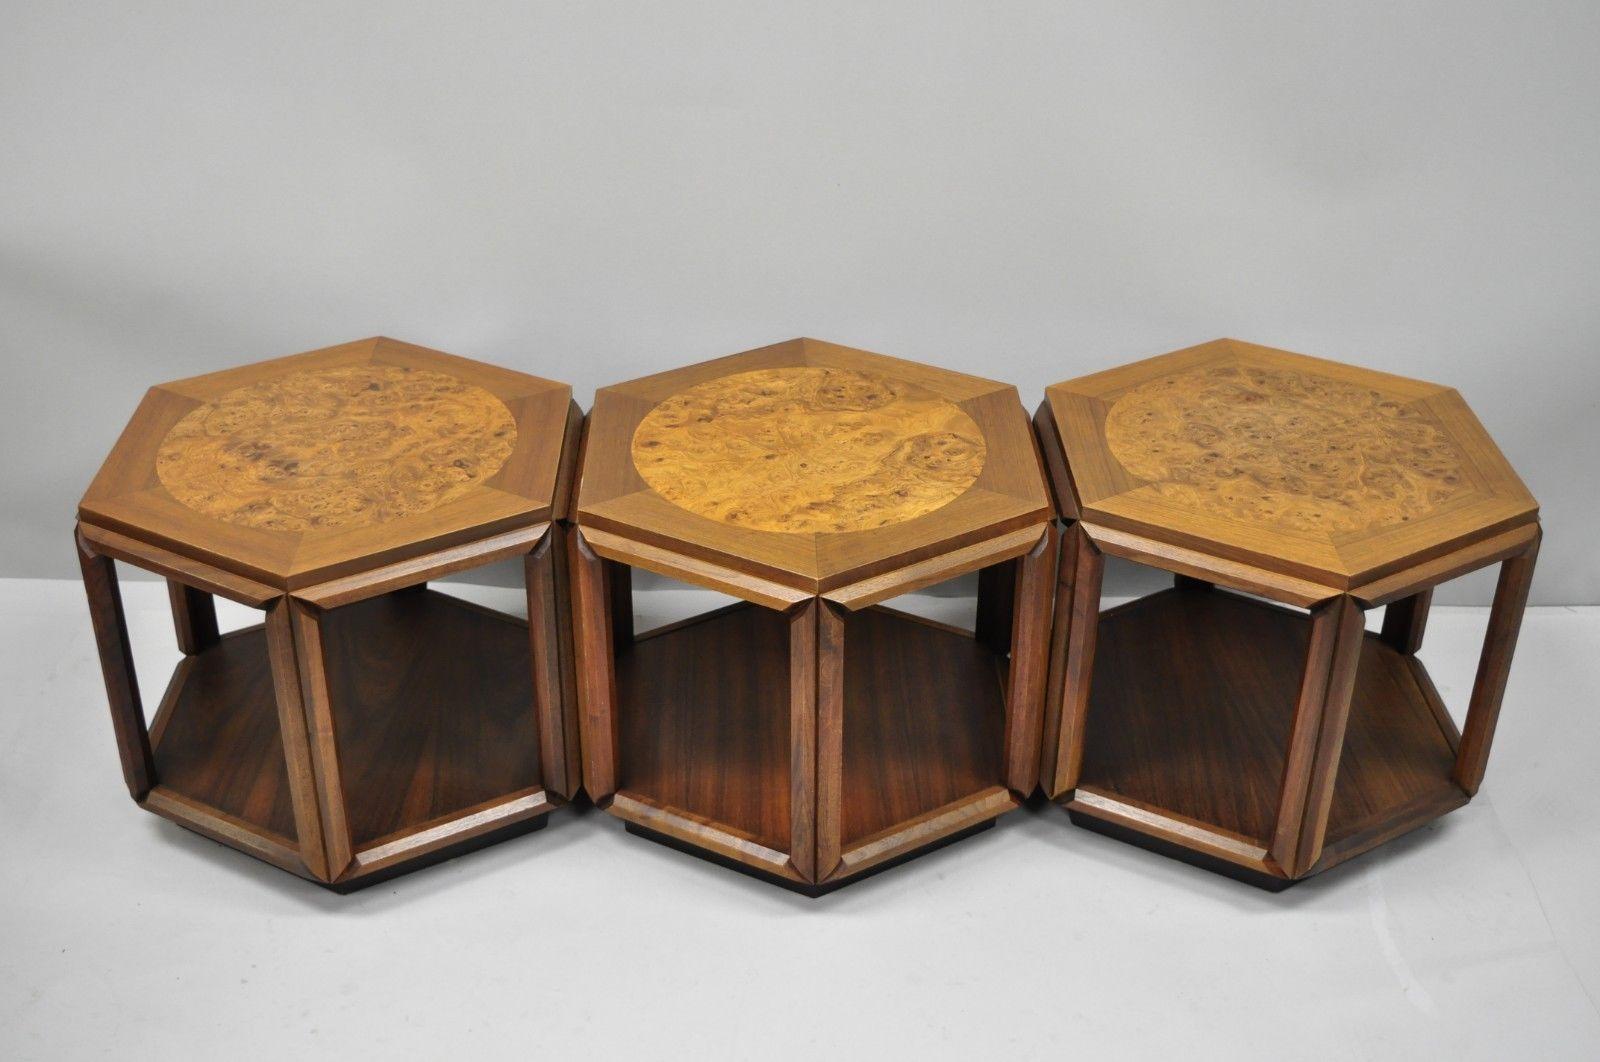 Set of 3 John Keal for Brown Saltman burl wood hexagon side tables. Listing includes, 3 side tables with nicely joined and angled corners, lower shelves, black platforms, beautiful wood grain, original label, and sleek sculptural form, circa